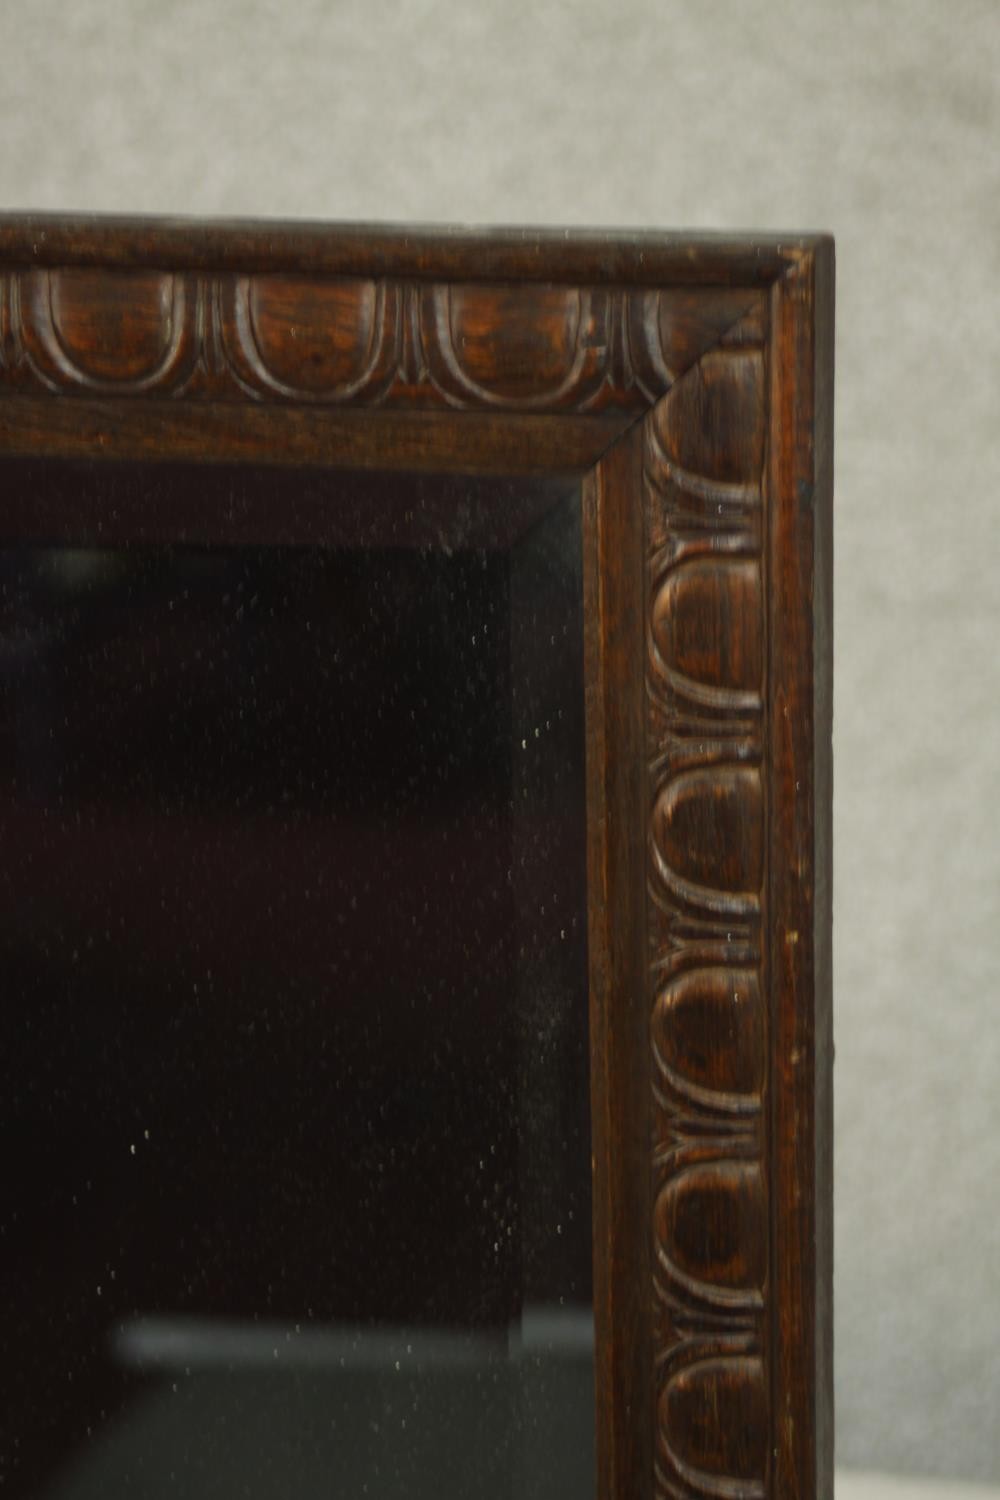 An early 20th century rectangular oak wall mirror, the frame carved with an egg and dart type - Image 3 of 5